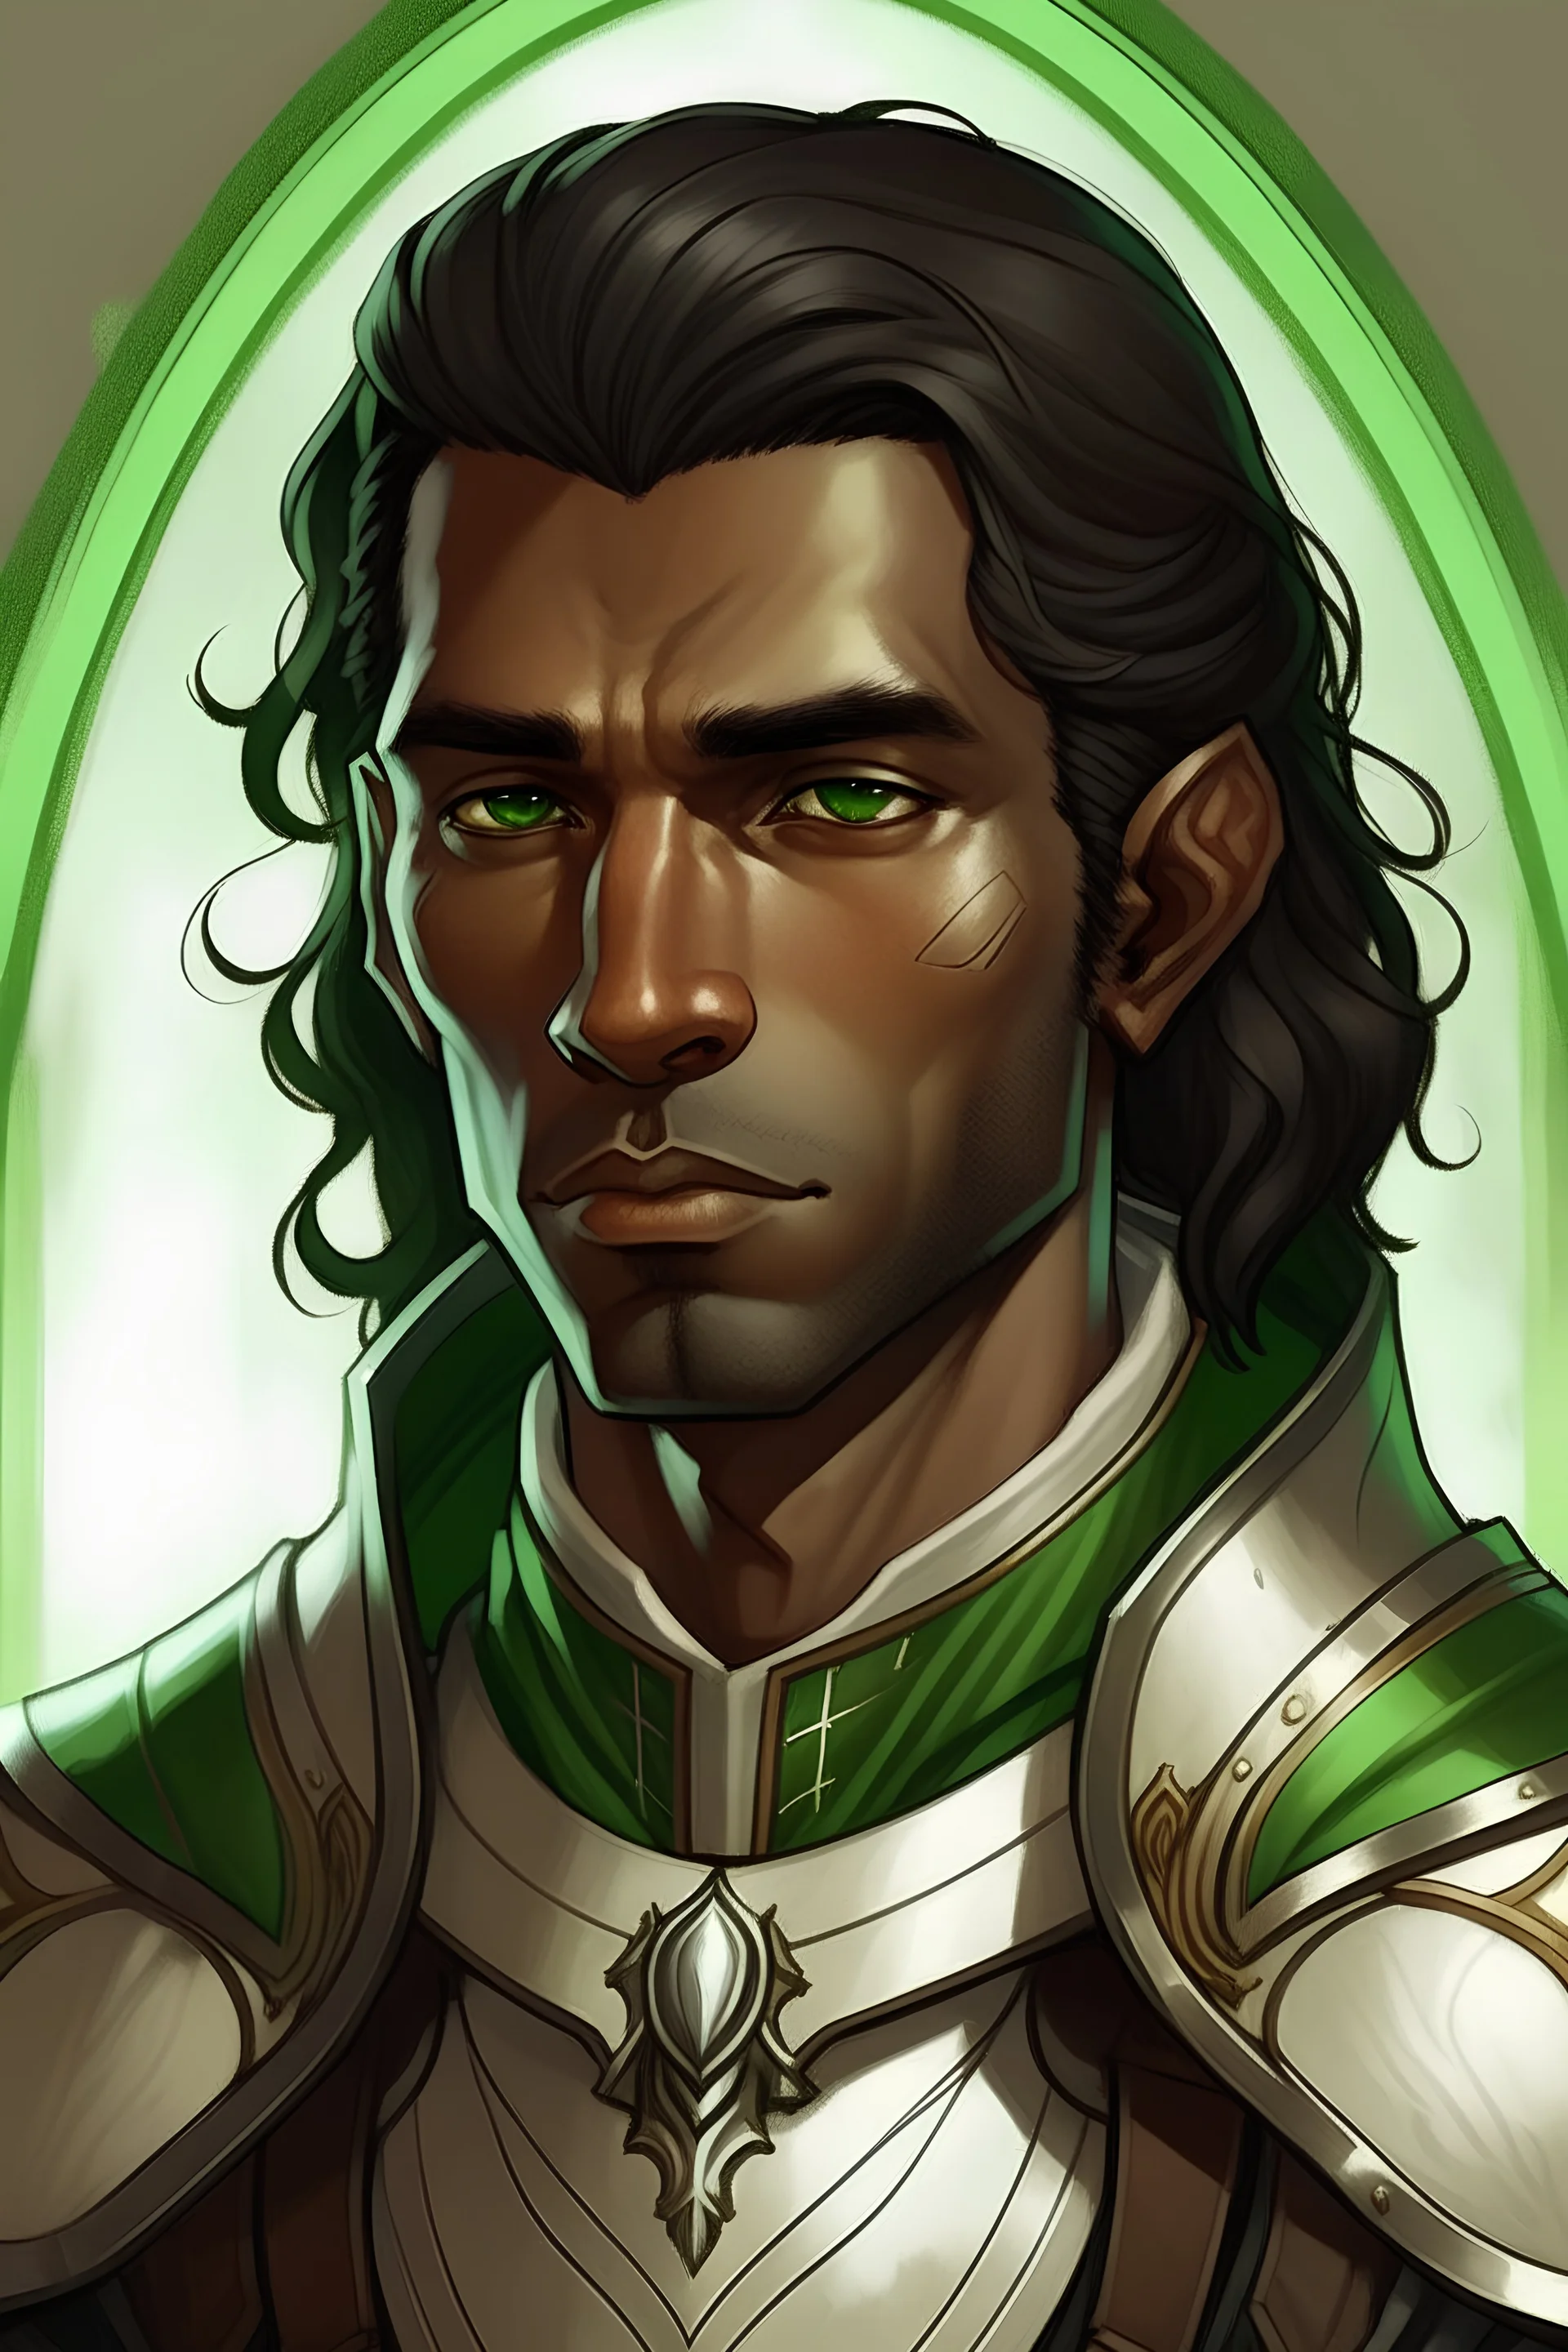 generate a portrait of a half-elf male cleric, with black hair, medium brown skin, green eyes, no tattoos or marks. He is wearing half-plate armor with hints of green and brown